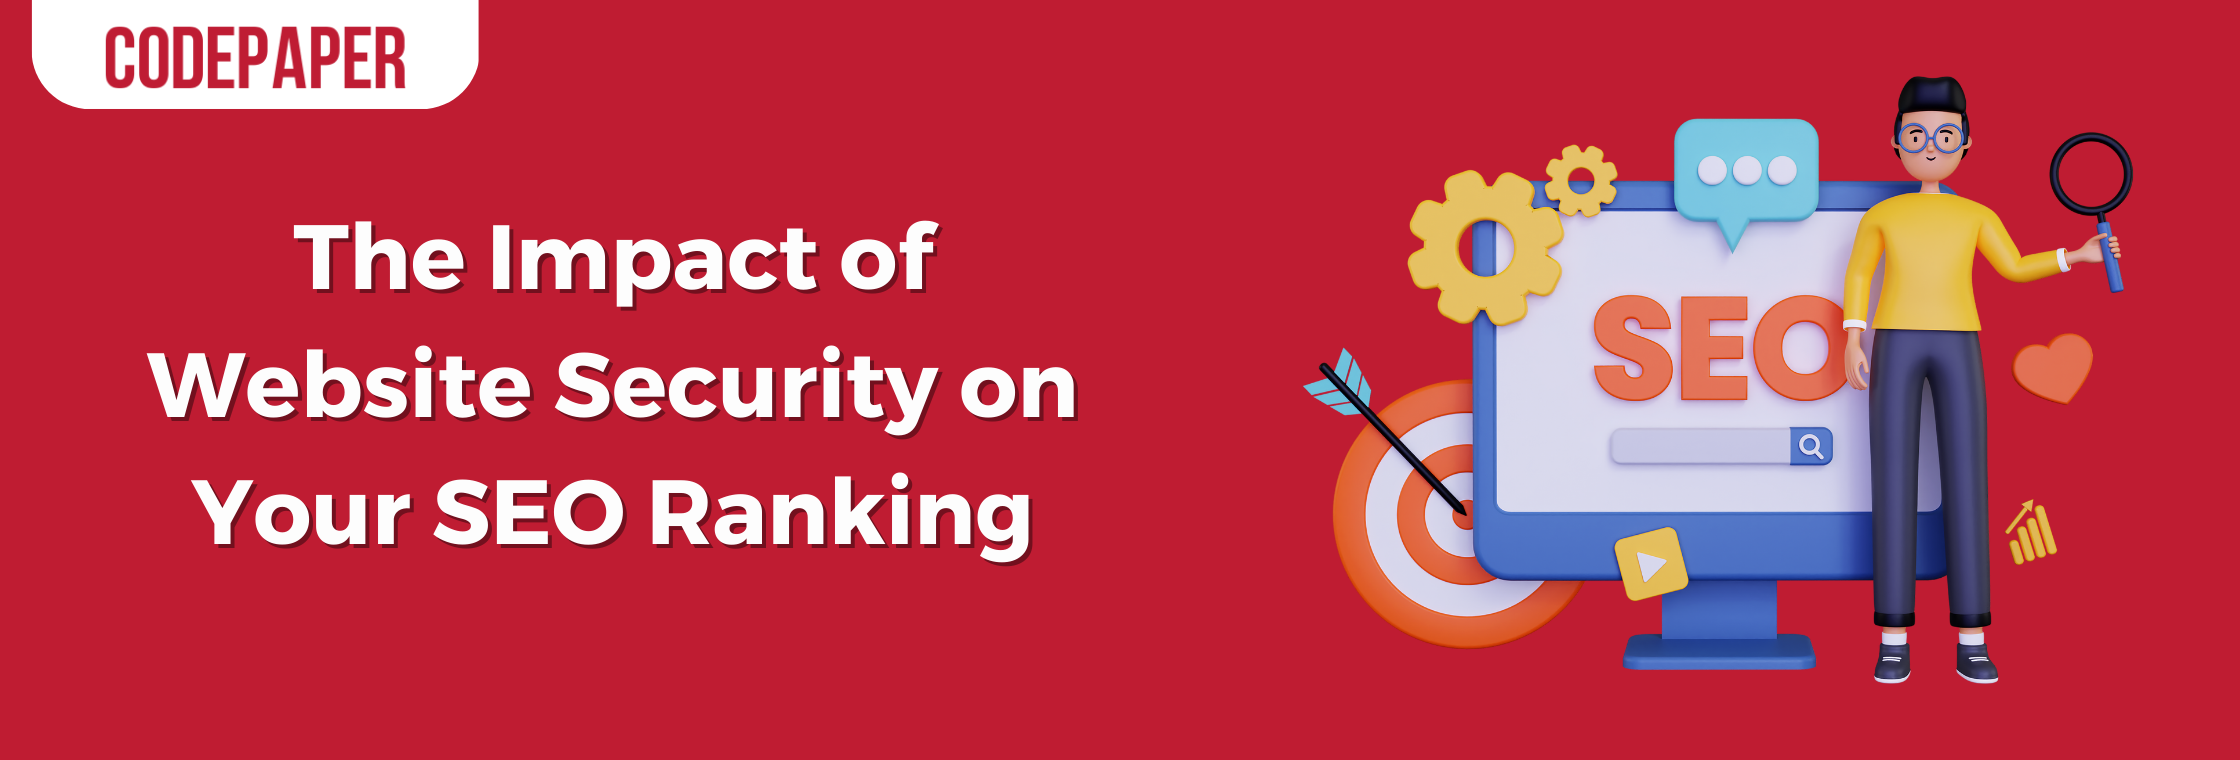 The Impact of Website Security on Your SEO Ranking